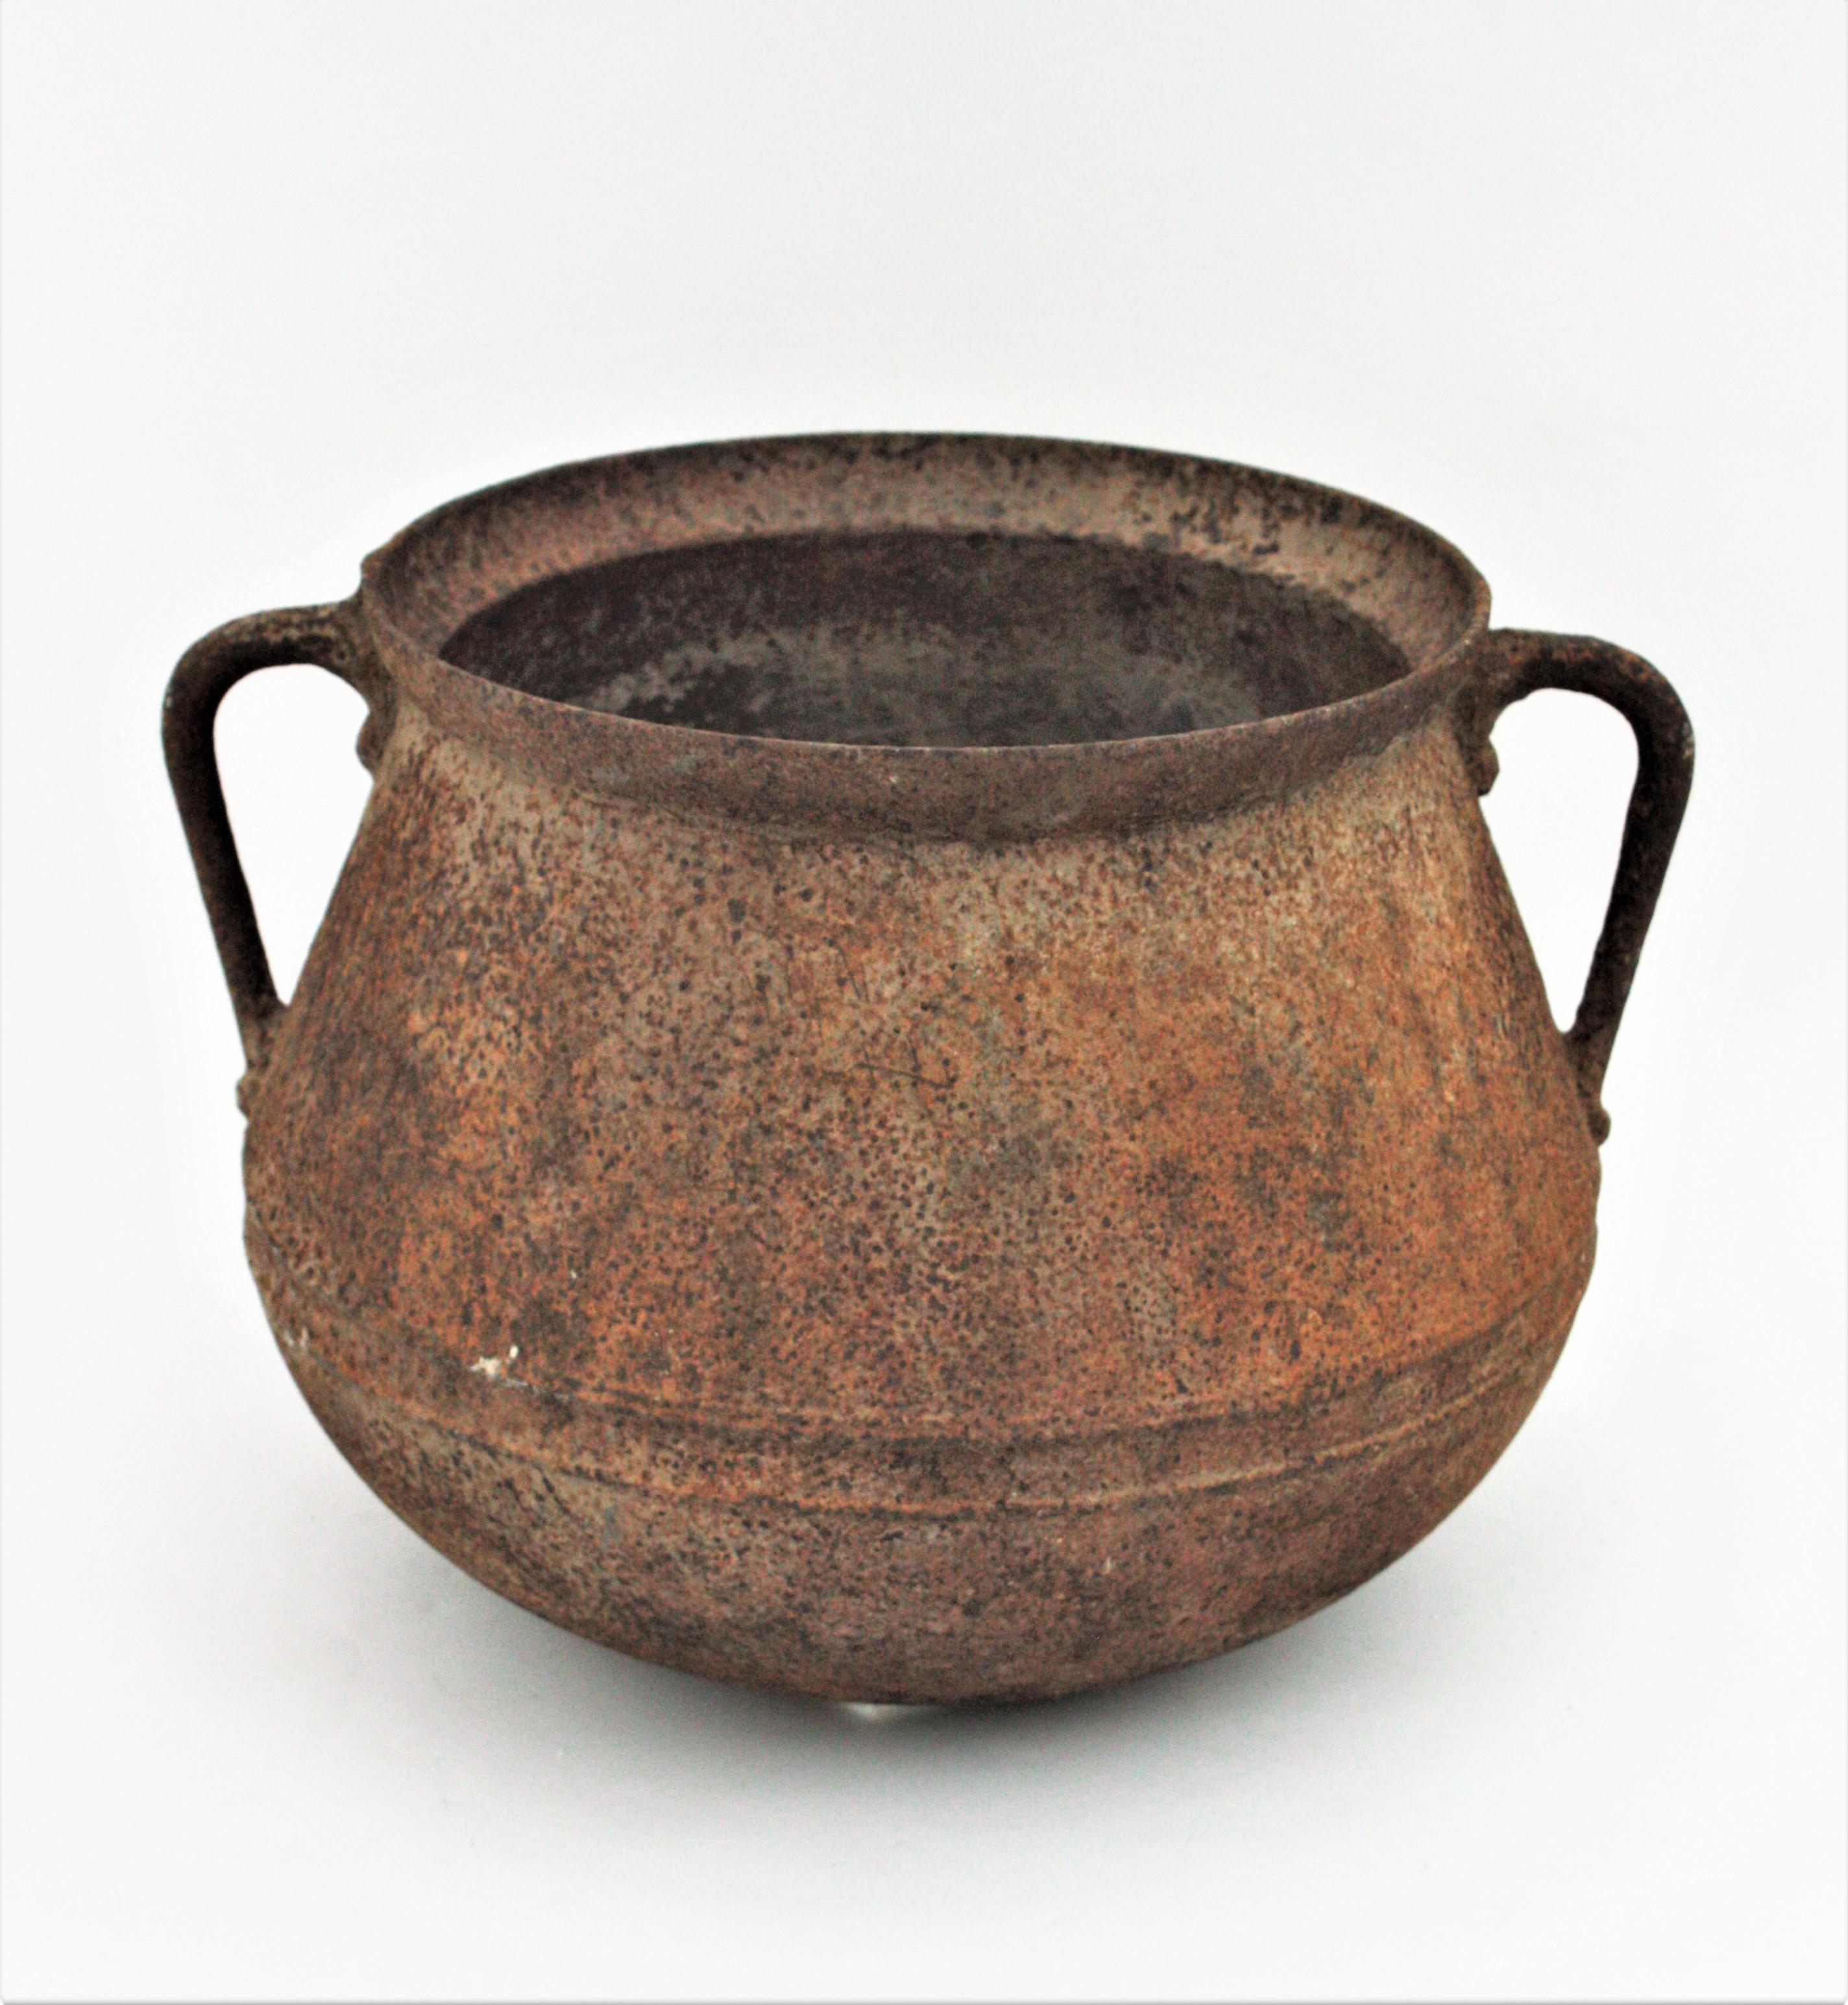 Spanish Rustic Iron Cauldron Pot or Vessel with Rusty Original Patina For Sale 2